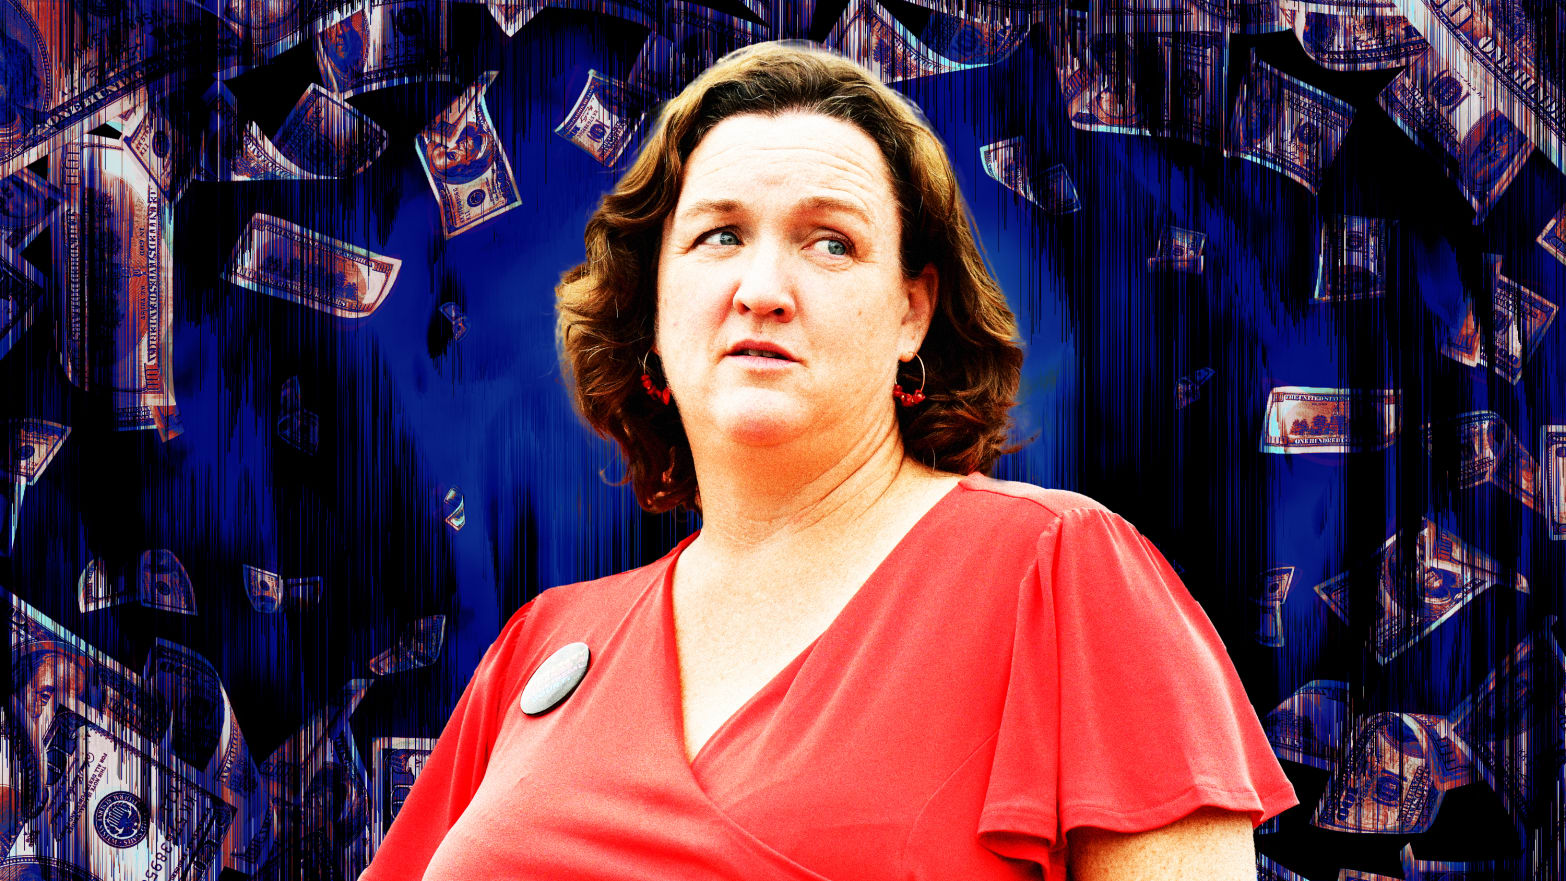 A photo illustration of Rep. Katie Porter and a dark money background.